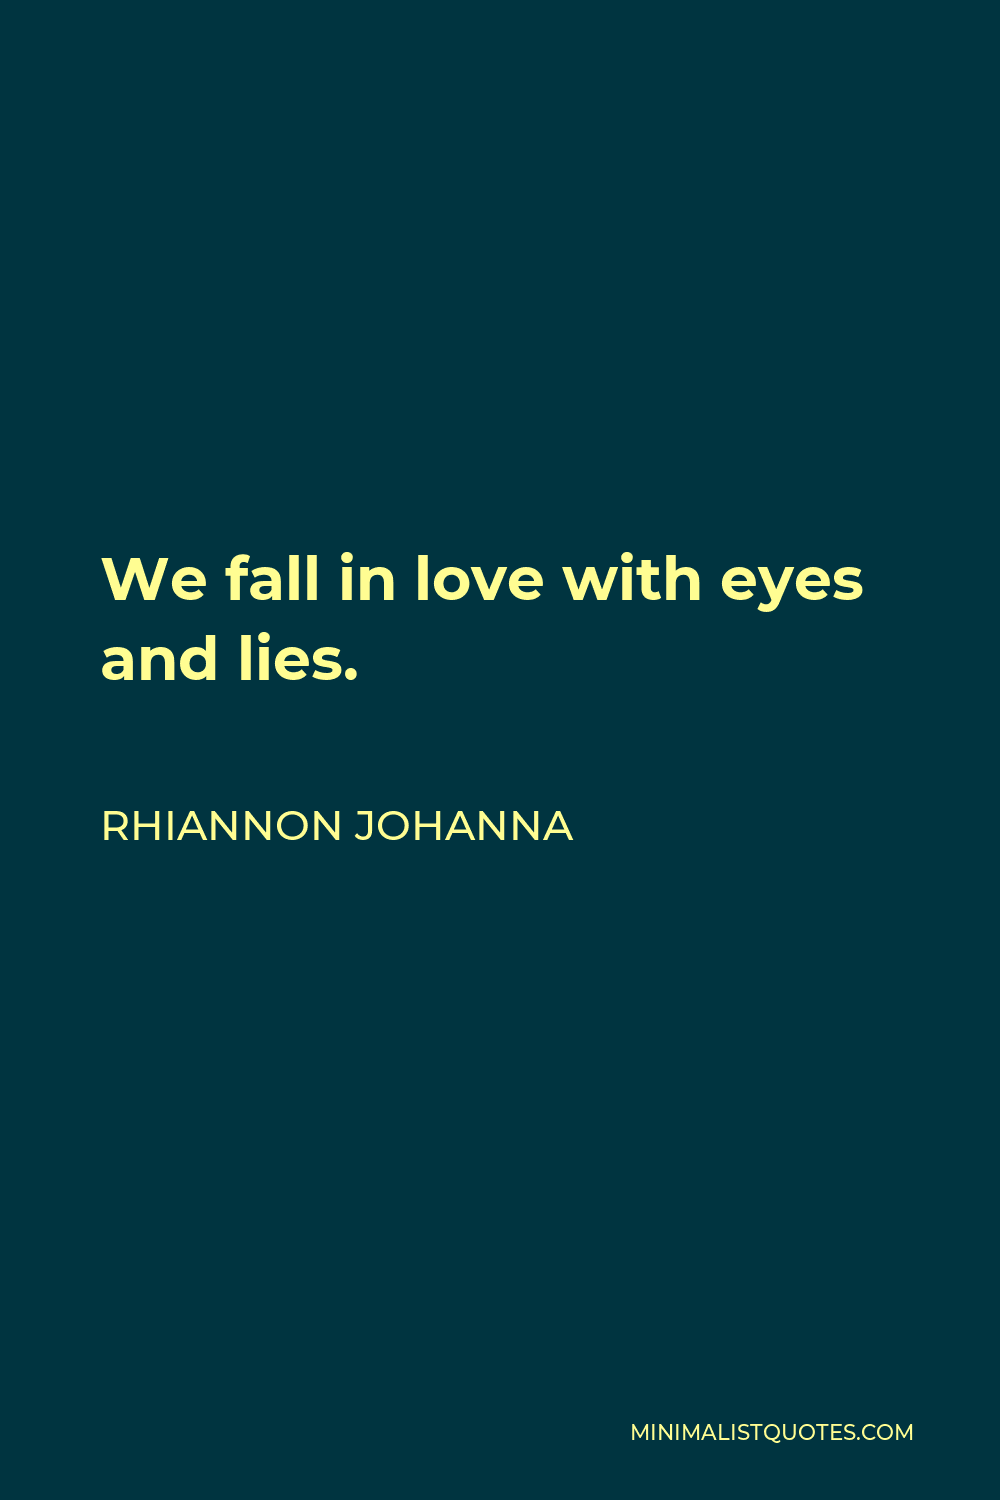 Rhiannon Johanna Quote - We fall in love with eyes and lies.